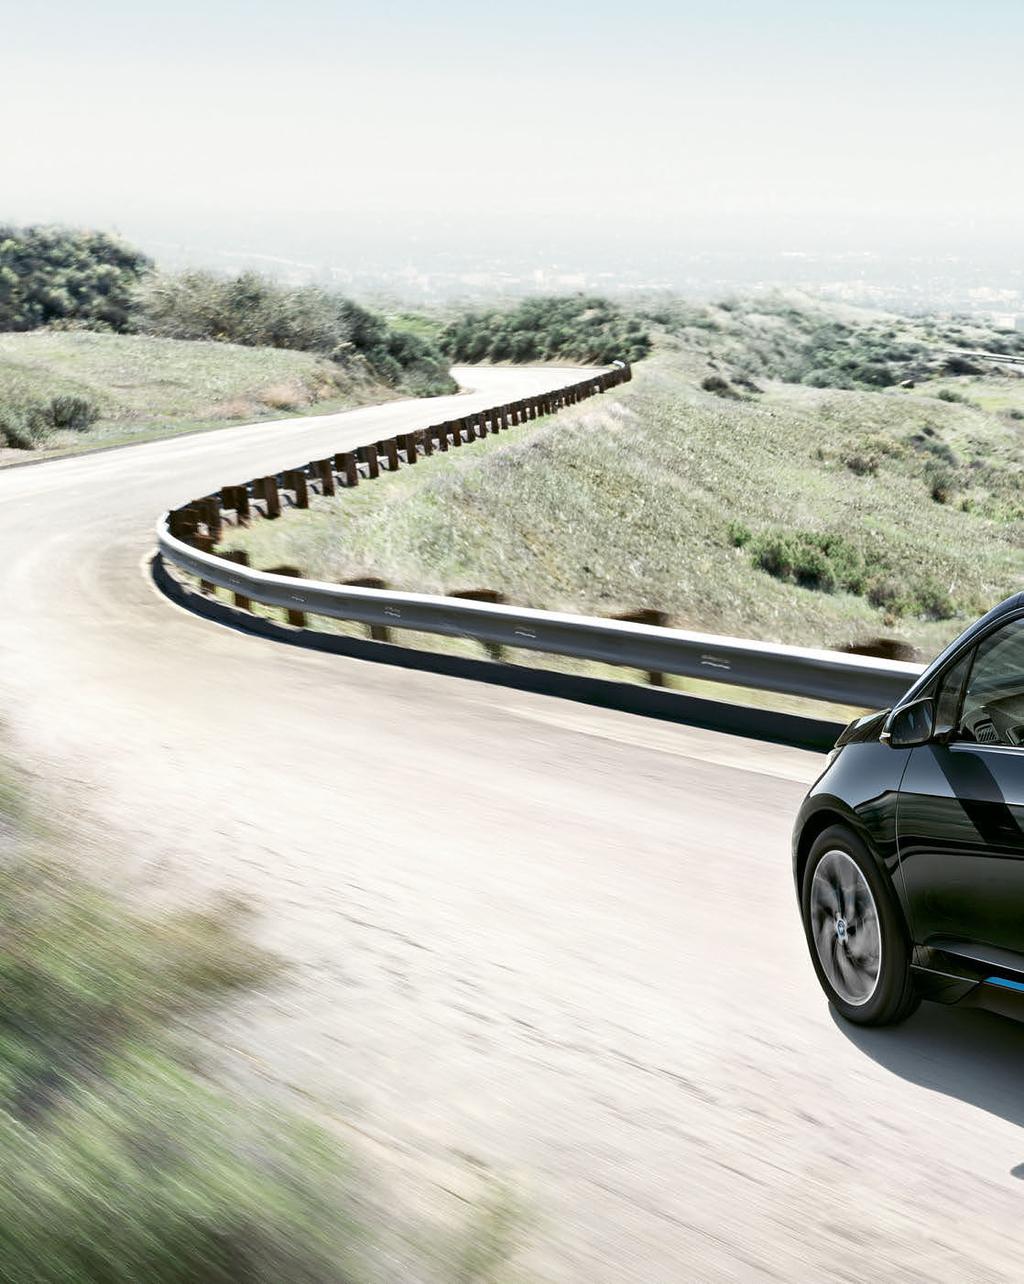 ALWAYS FULL OF ENERGY. THE BMW i3 06 07 BMW i is advancing the development of sustainable electric mobility and making it even more suited to everyday use.